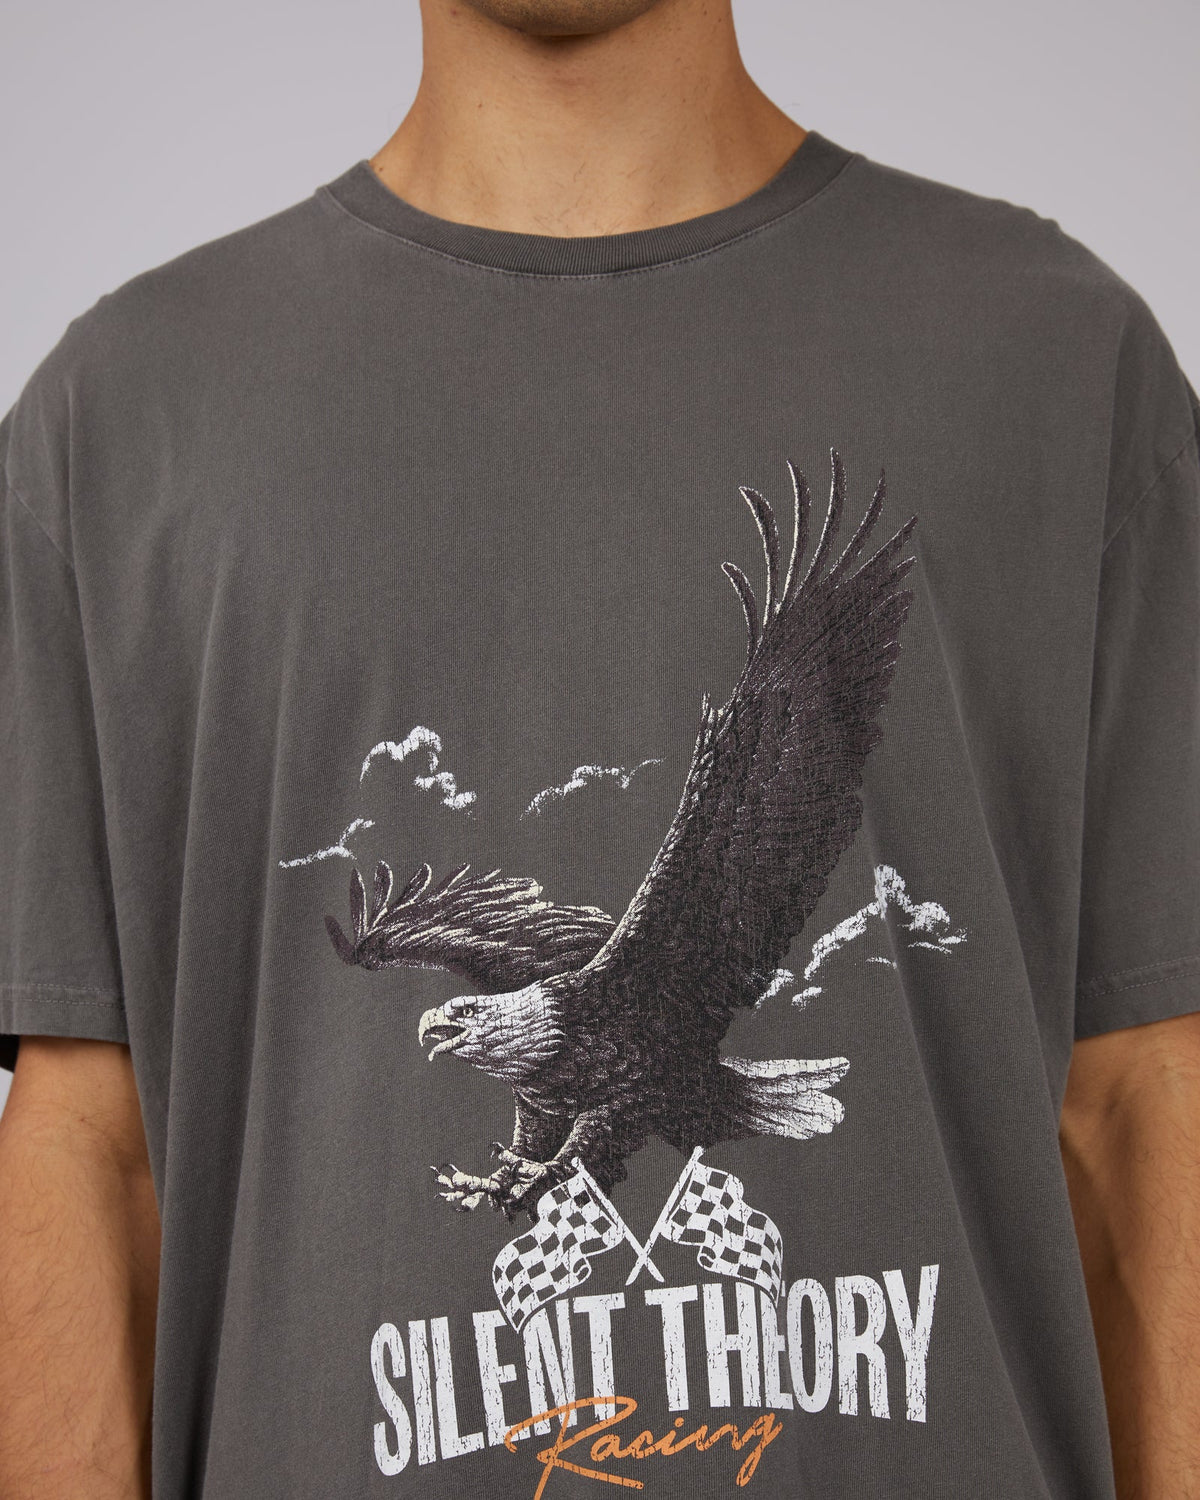 Silent Theory-Pit Stop Tee Coal-Edge Clothing